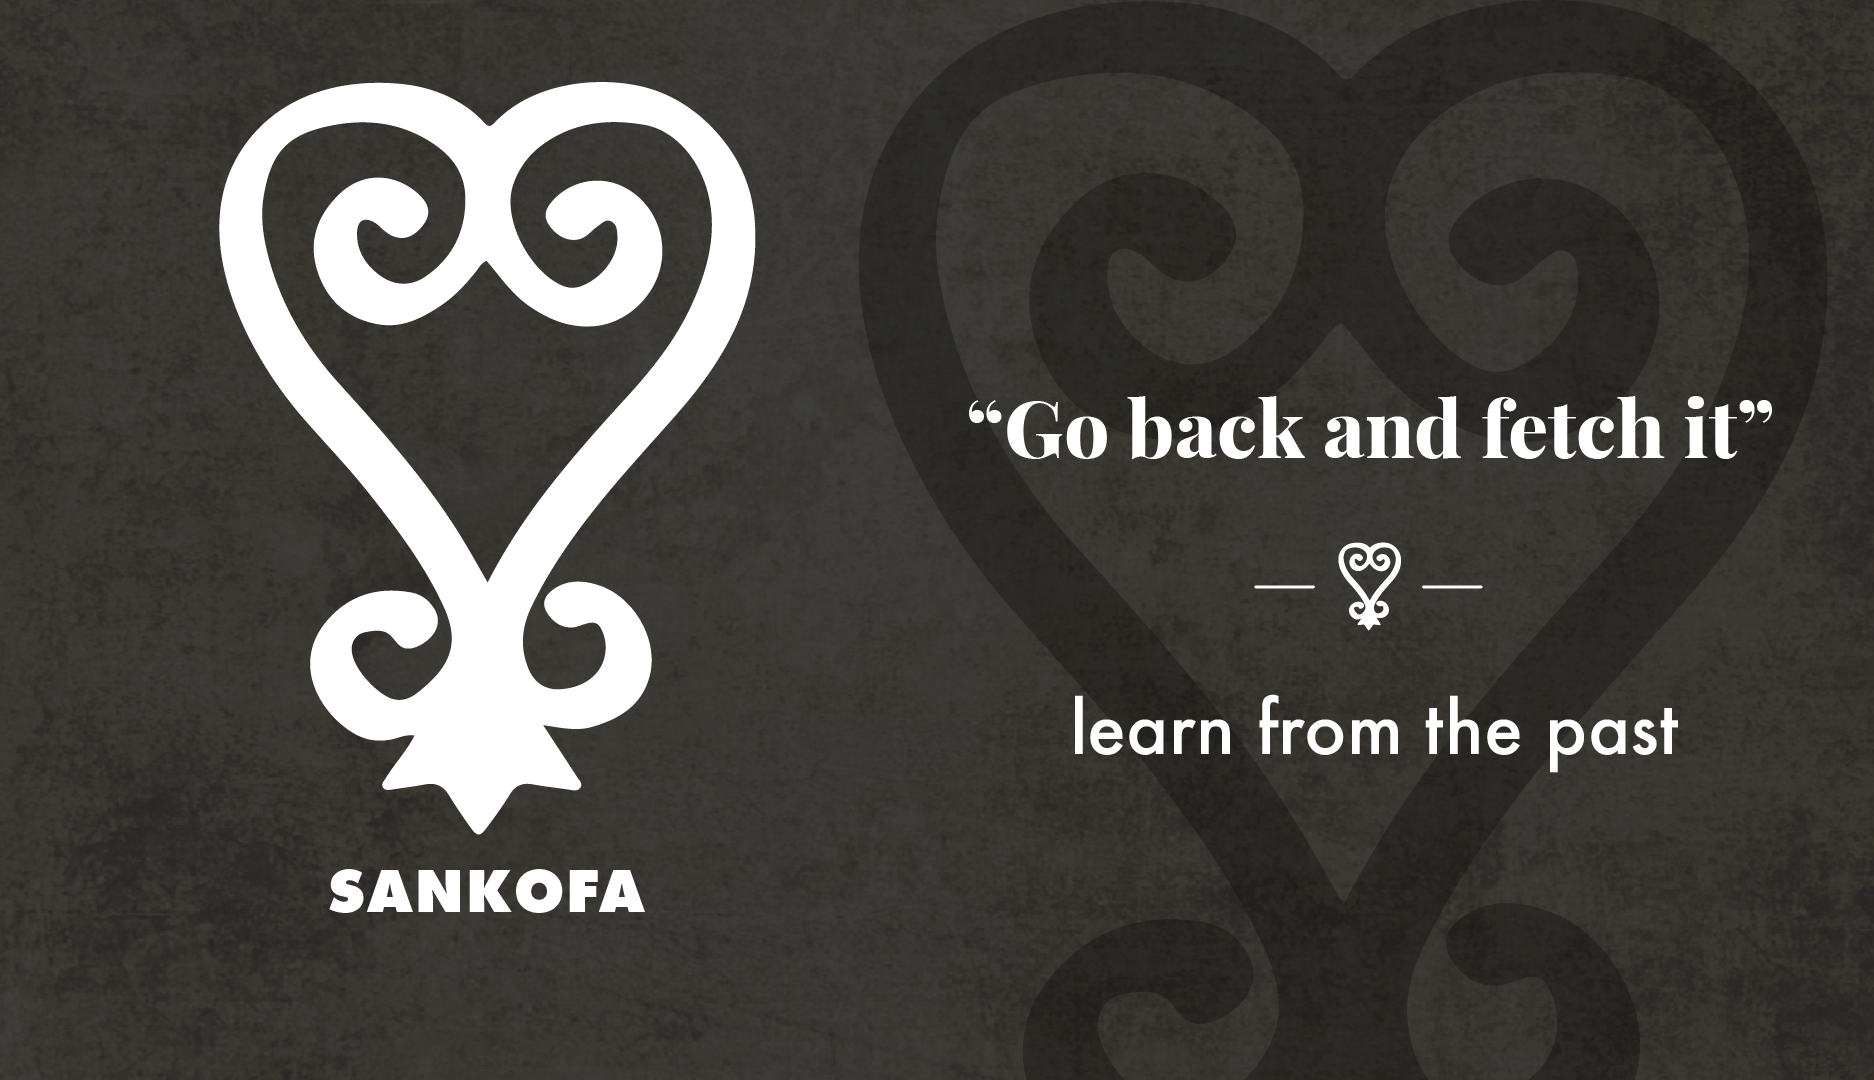 Adinkra symbol "SANKOFA" meaning "Go Back and Get It" learn from the past